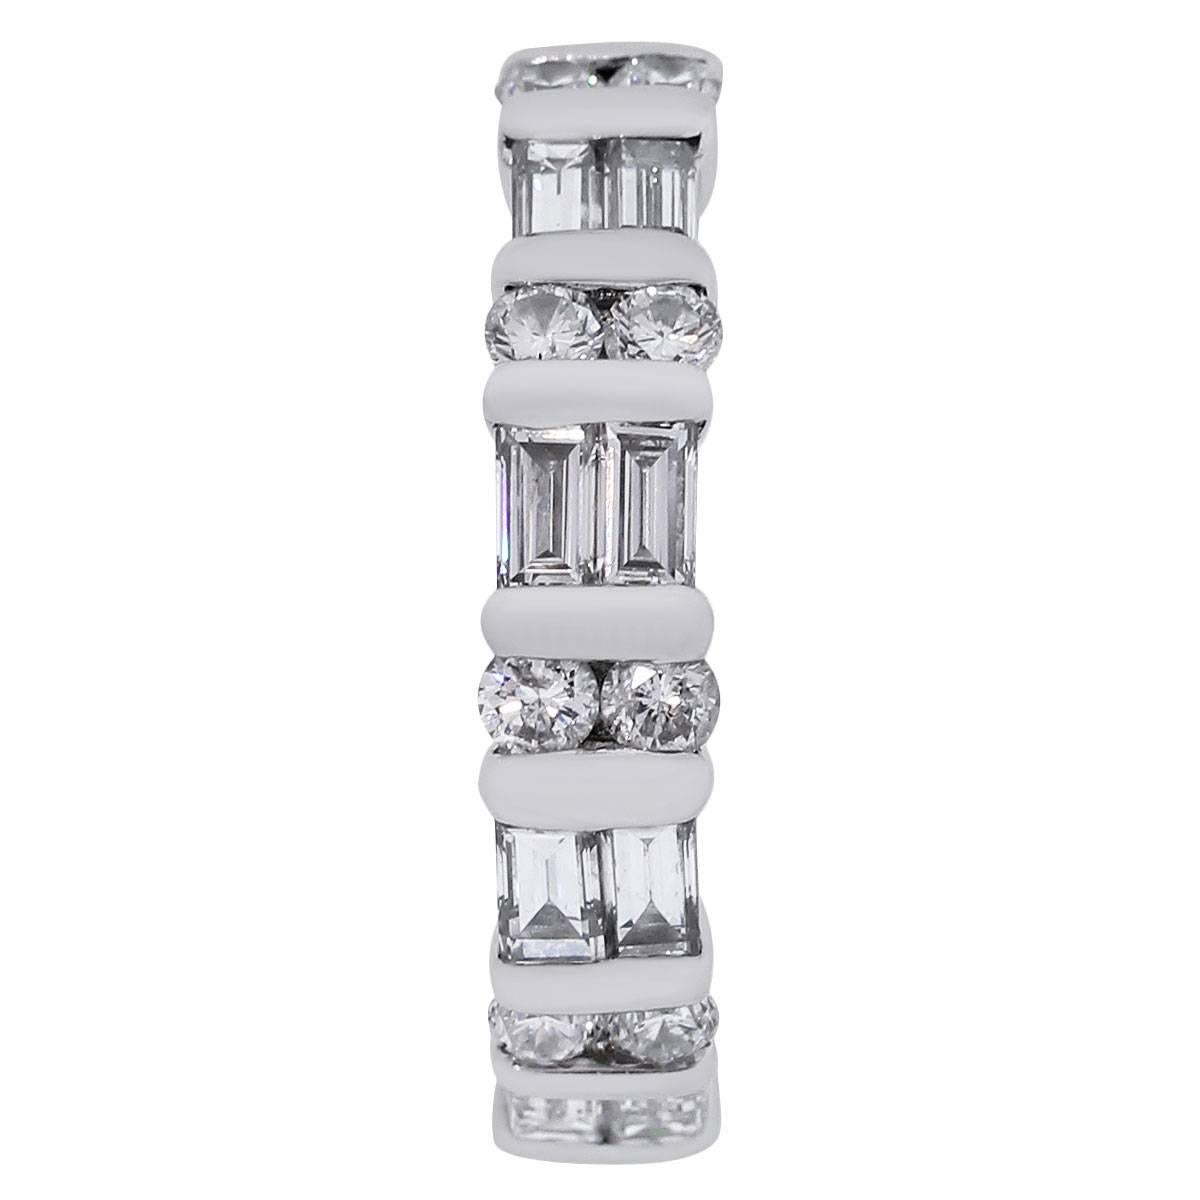 Material: Platinum
Diamond Details: Approximately 1.60ctw baguette cut and round brilliant diamonds. Diamonds are G/H in color and VS in clarity.
Ring Size: 7
Ring Measurements: 0.80